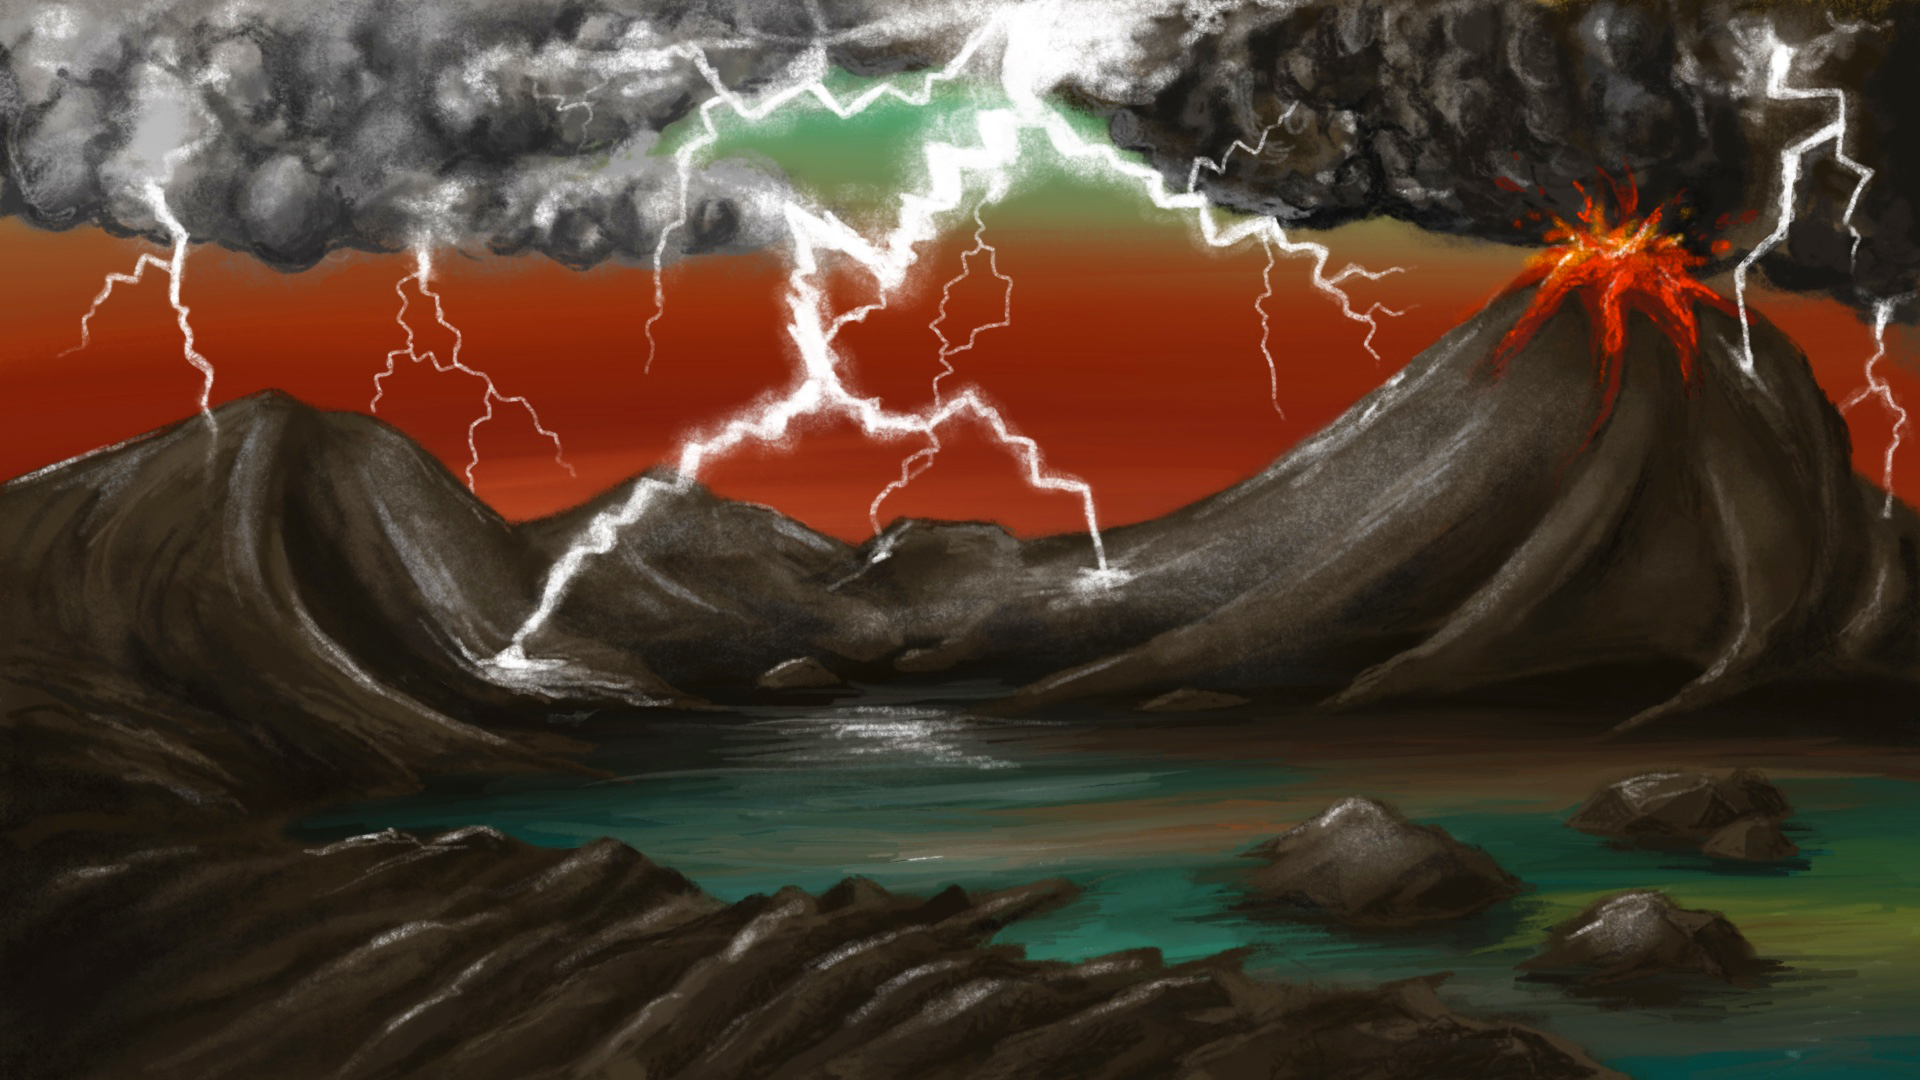 An artist's rendition of the early Earth environment. Lightning generated by storms and volcanic plumes frequently strikes volcanic rocks. The lightning strikes create fulgurites which contain phosphorus in a form that can be dissolved in water and concentrate in waters like volcanic ponds. Here, the phosphorus is able to form biomolecules which help lead to the emergence of life.